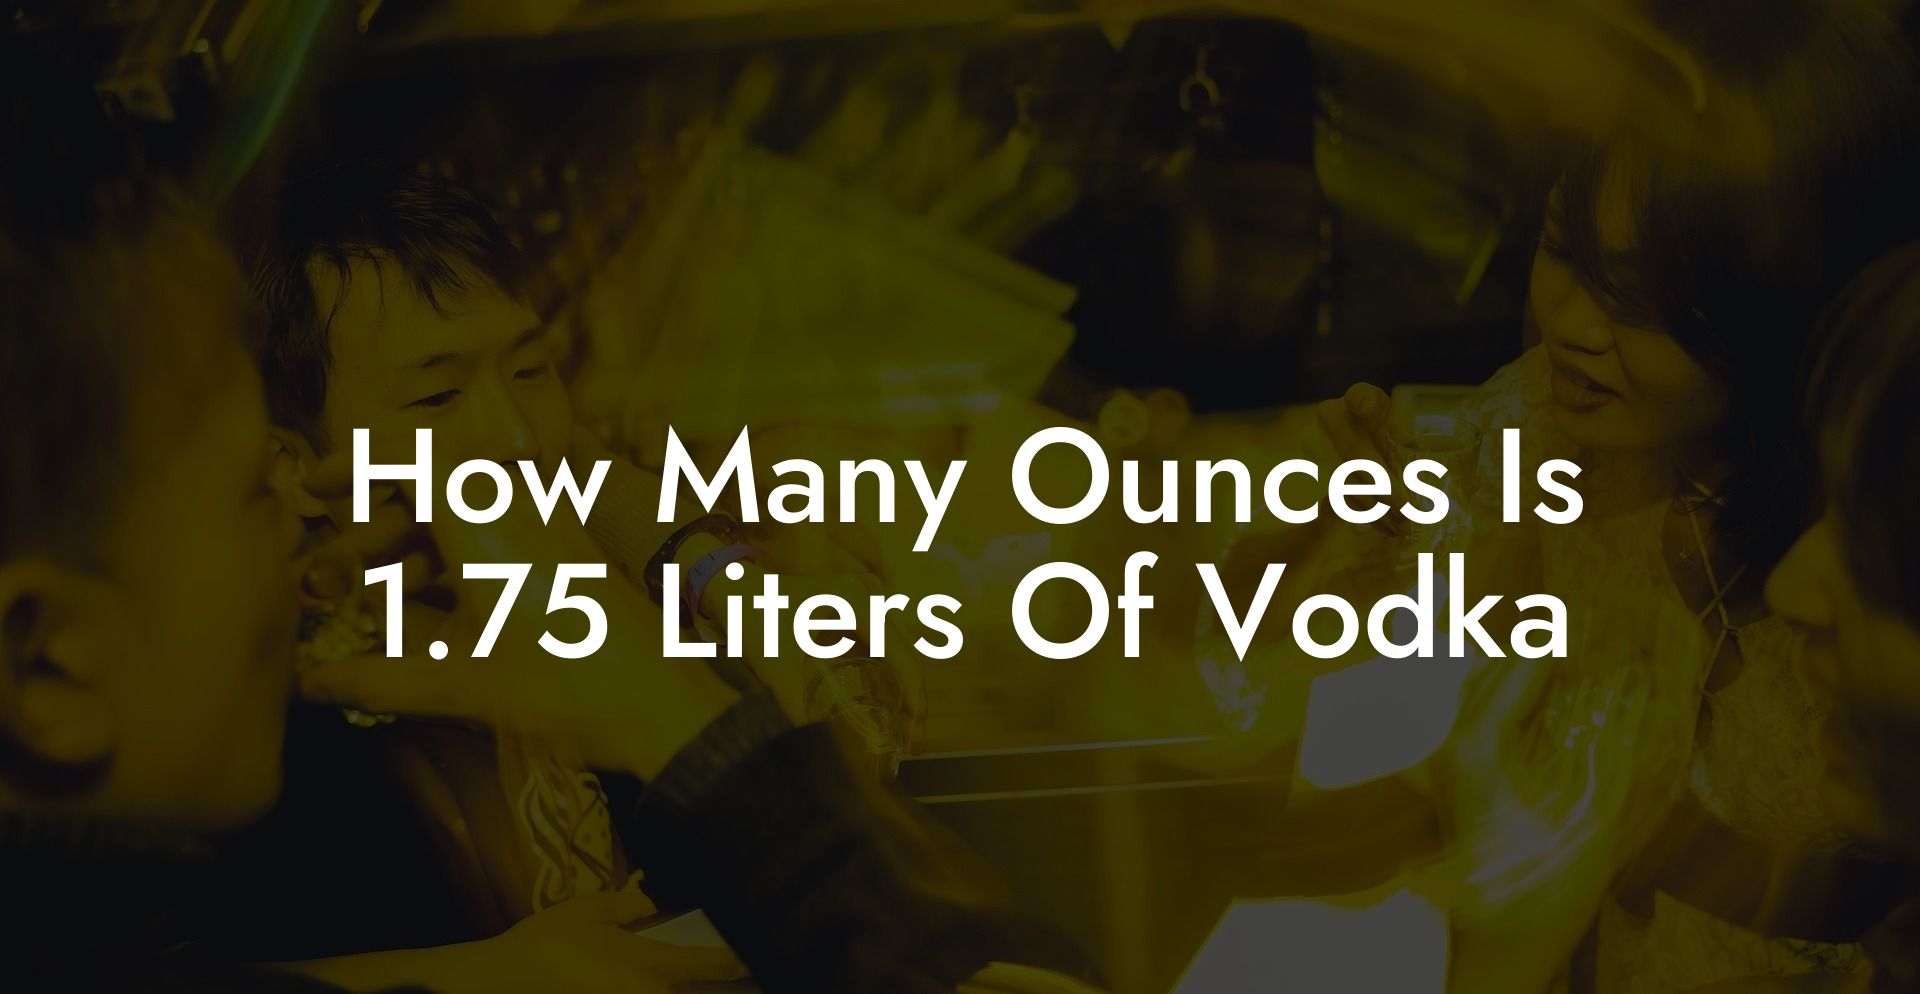 How Many Ounces Is 1.75 Liters Of Vodka